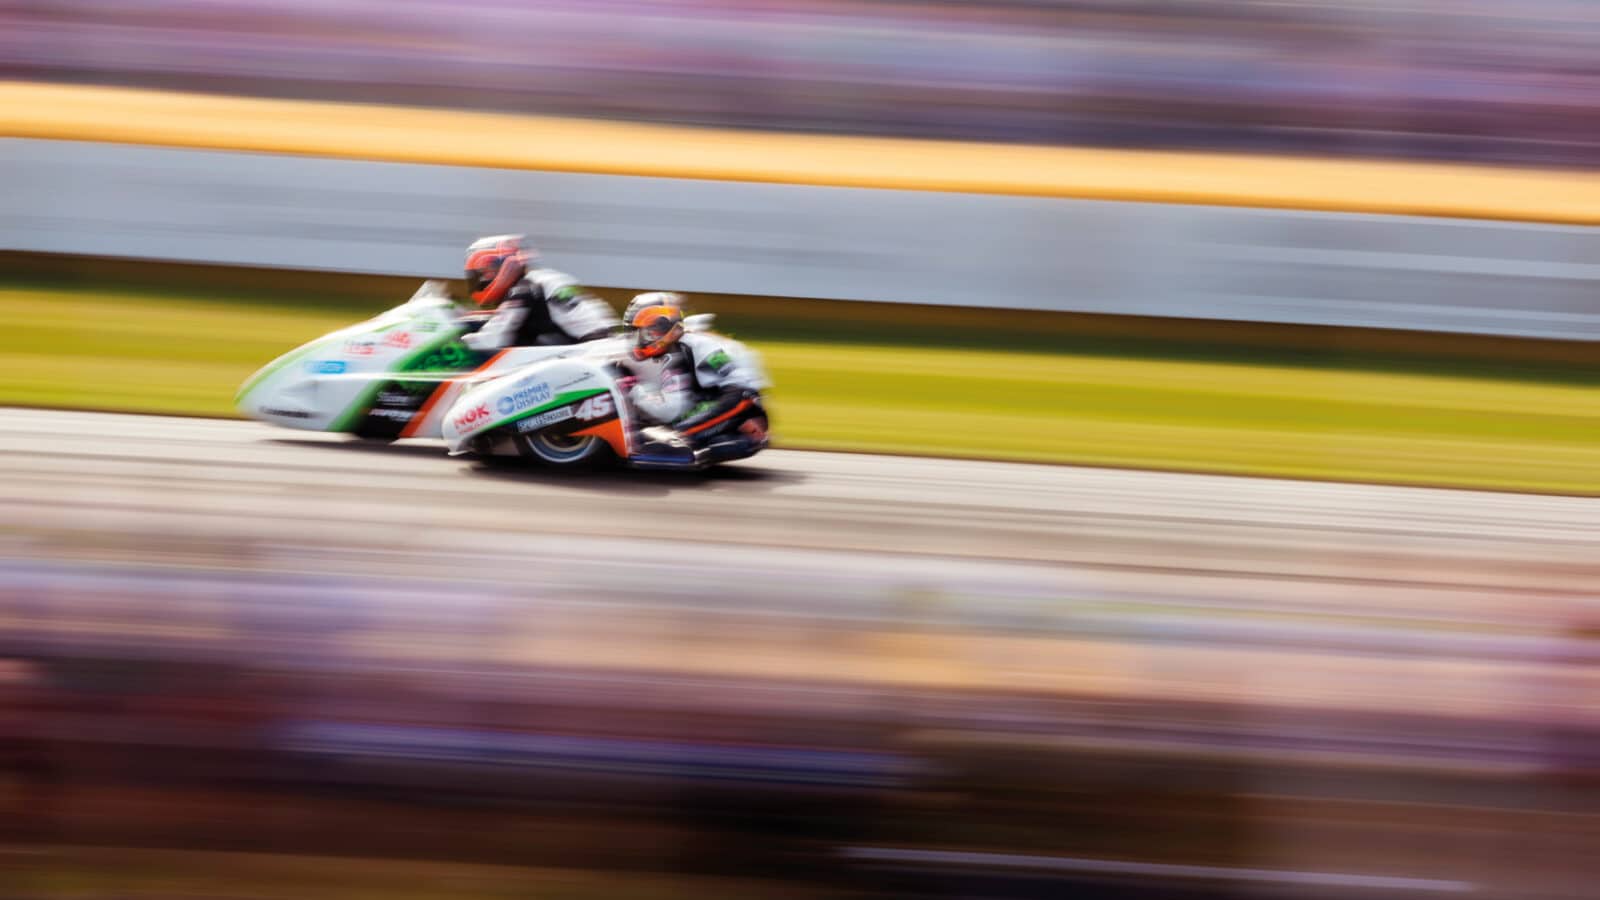 New to the Members’ Meeting this year is a Sidecar Shootout, with modern machinery